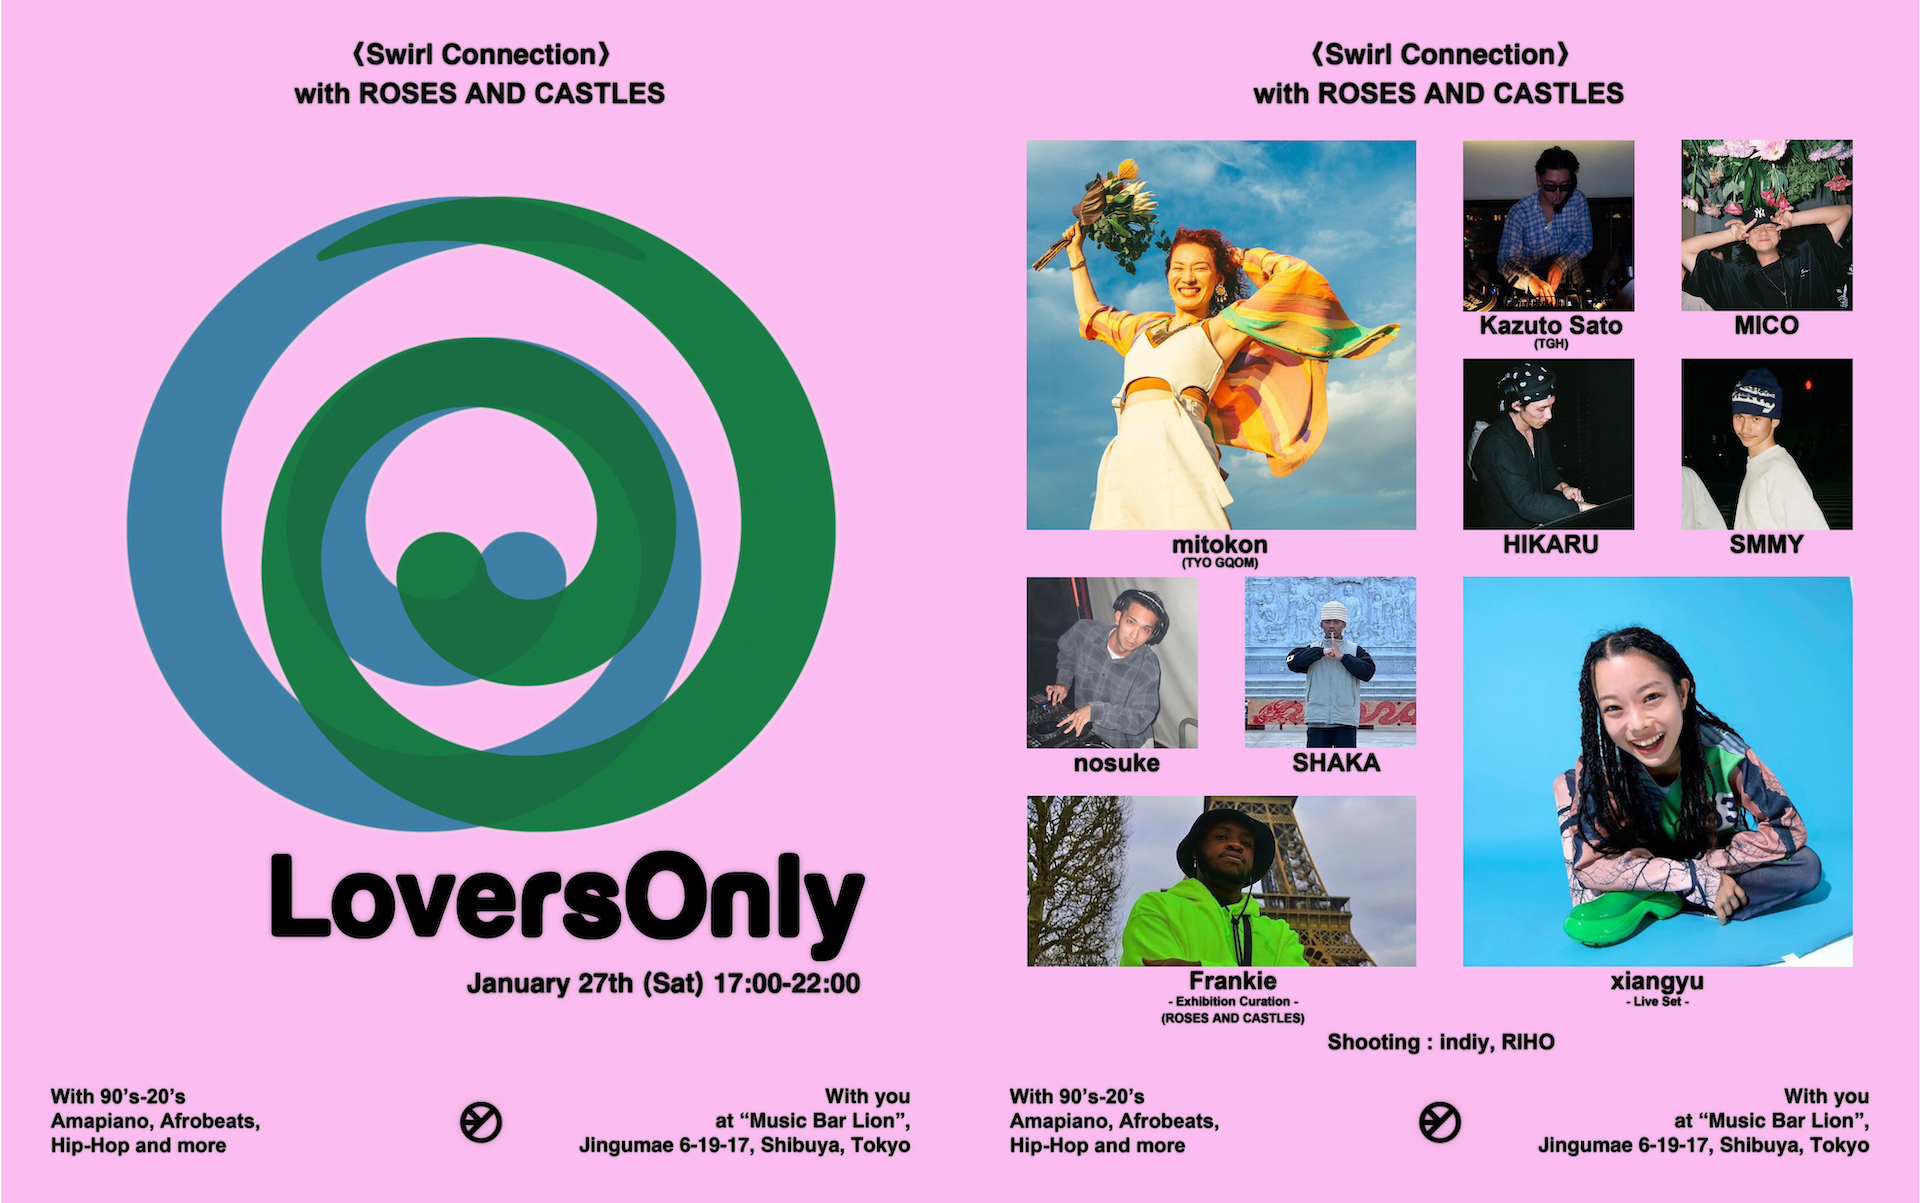 LoversOnly “Swirl Connection”